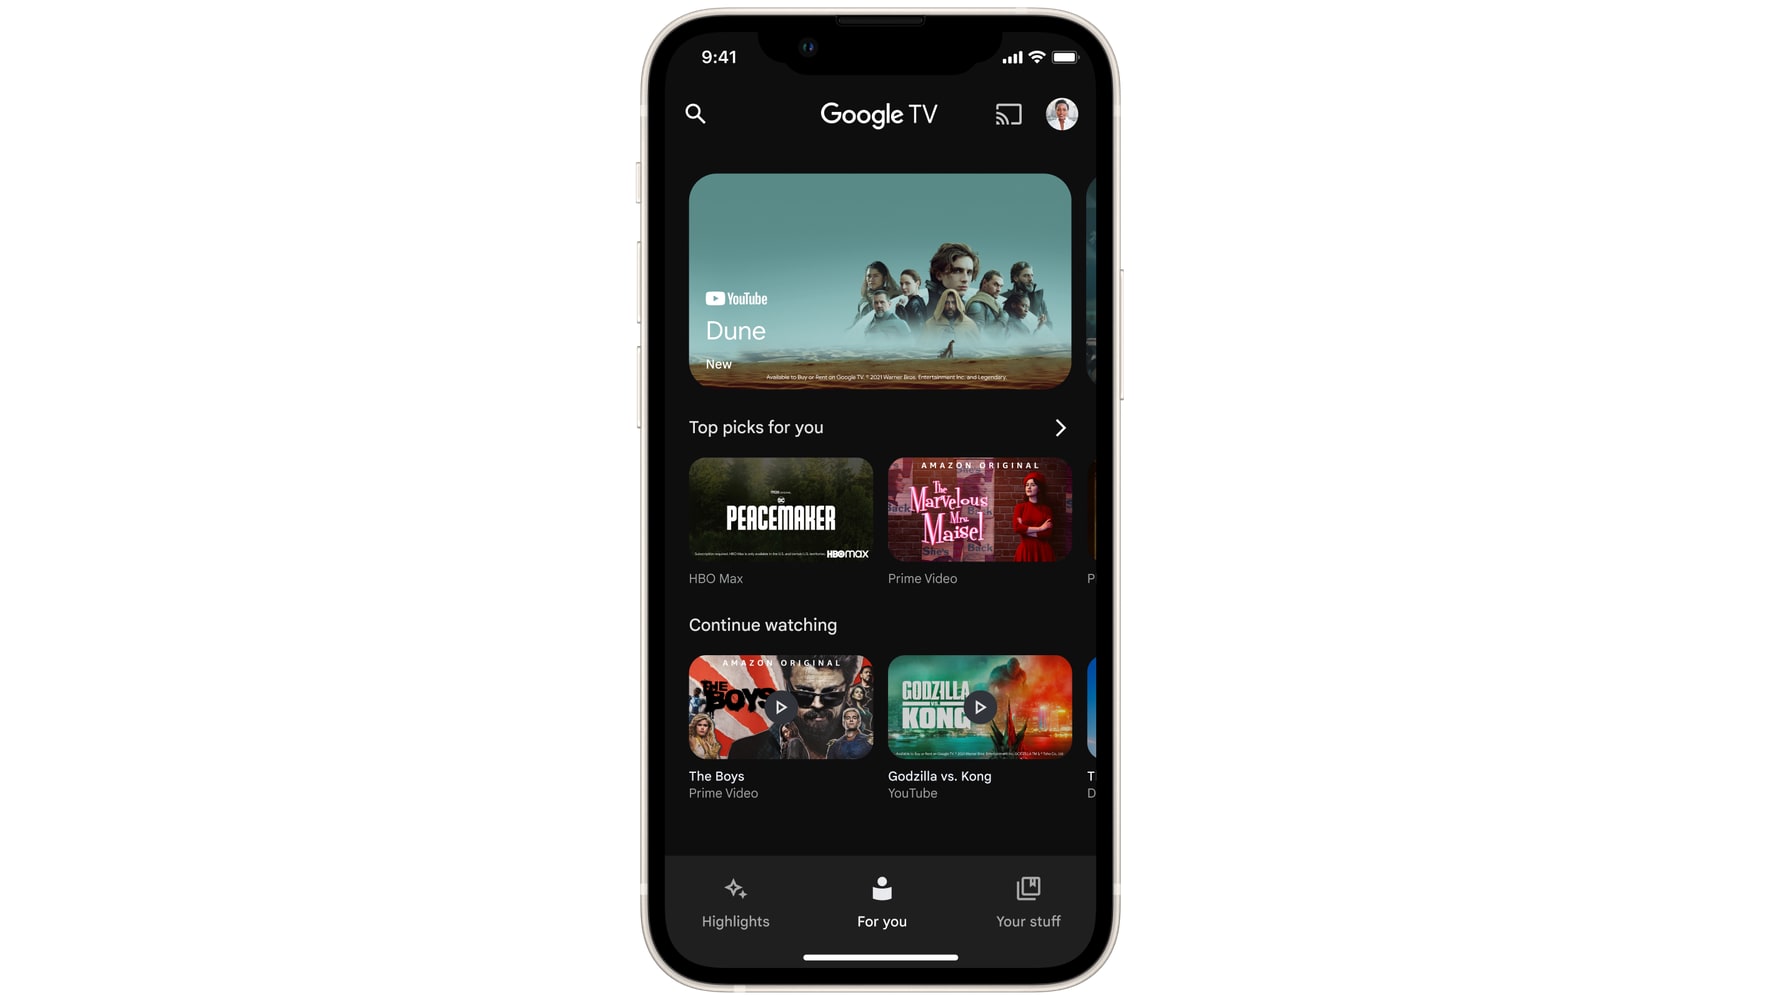 In this featured image, the Google TV app is shown running on an iPhone. It replaces the previous "Google TV Shows and Movies" app